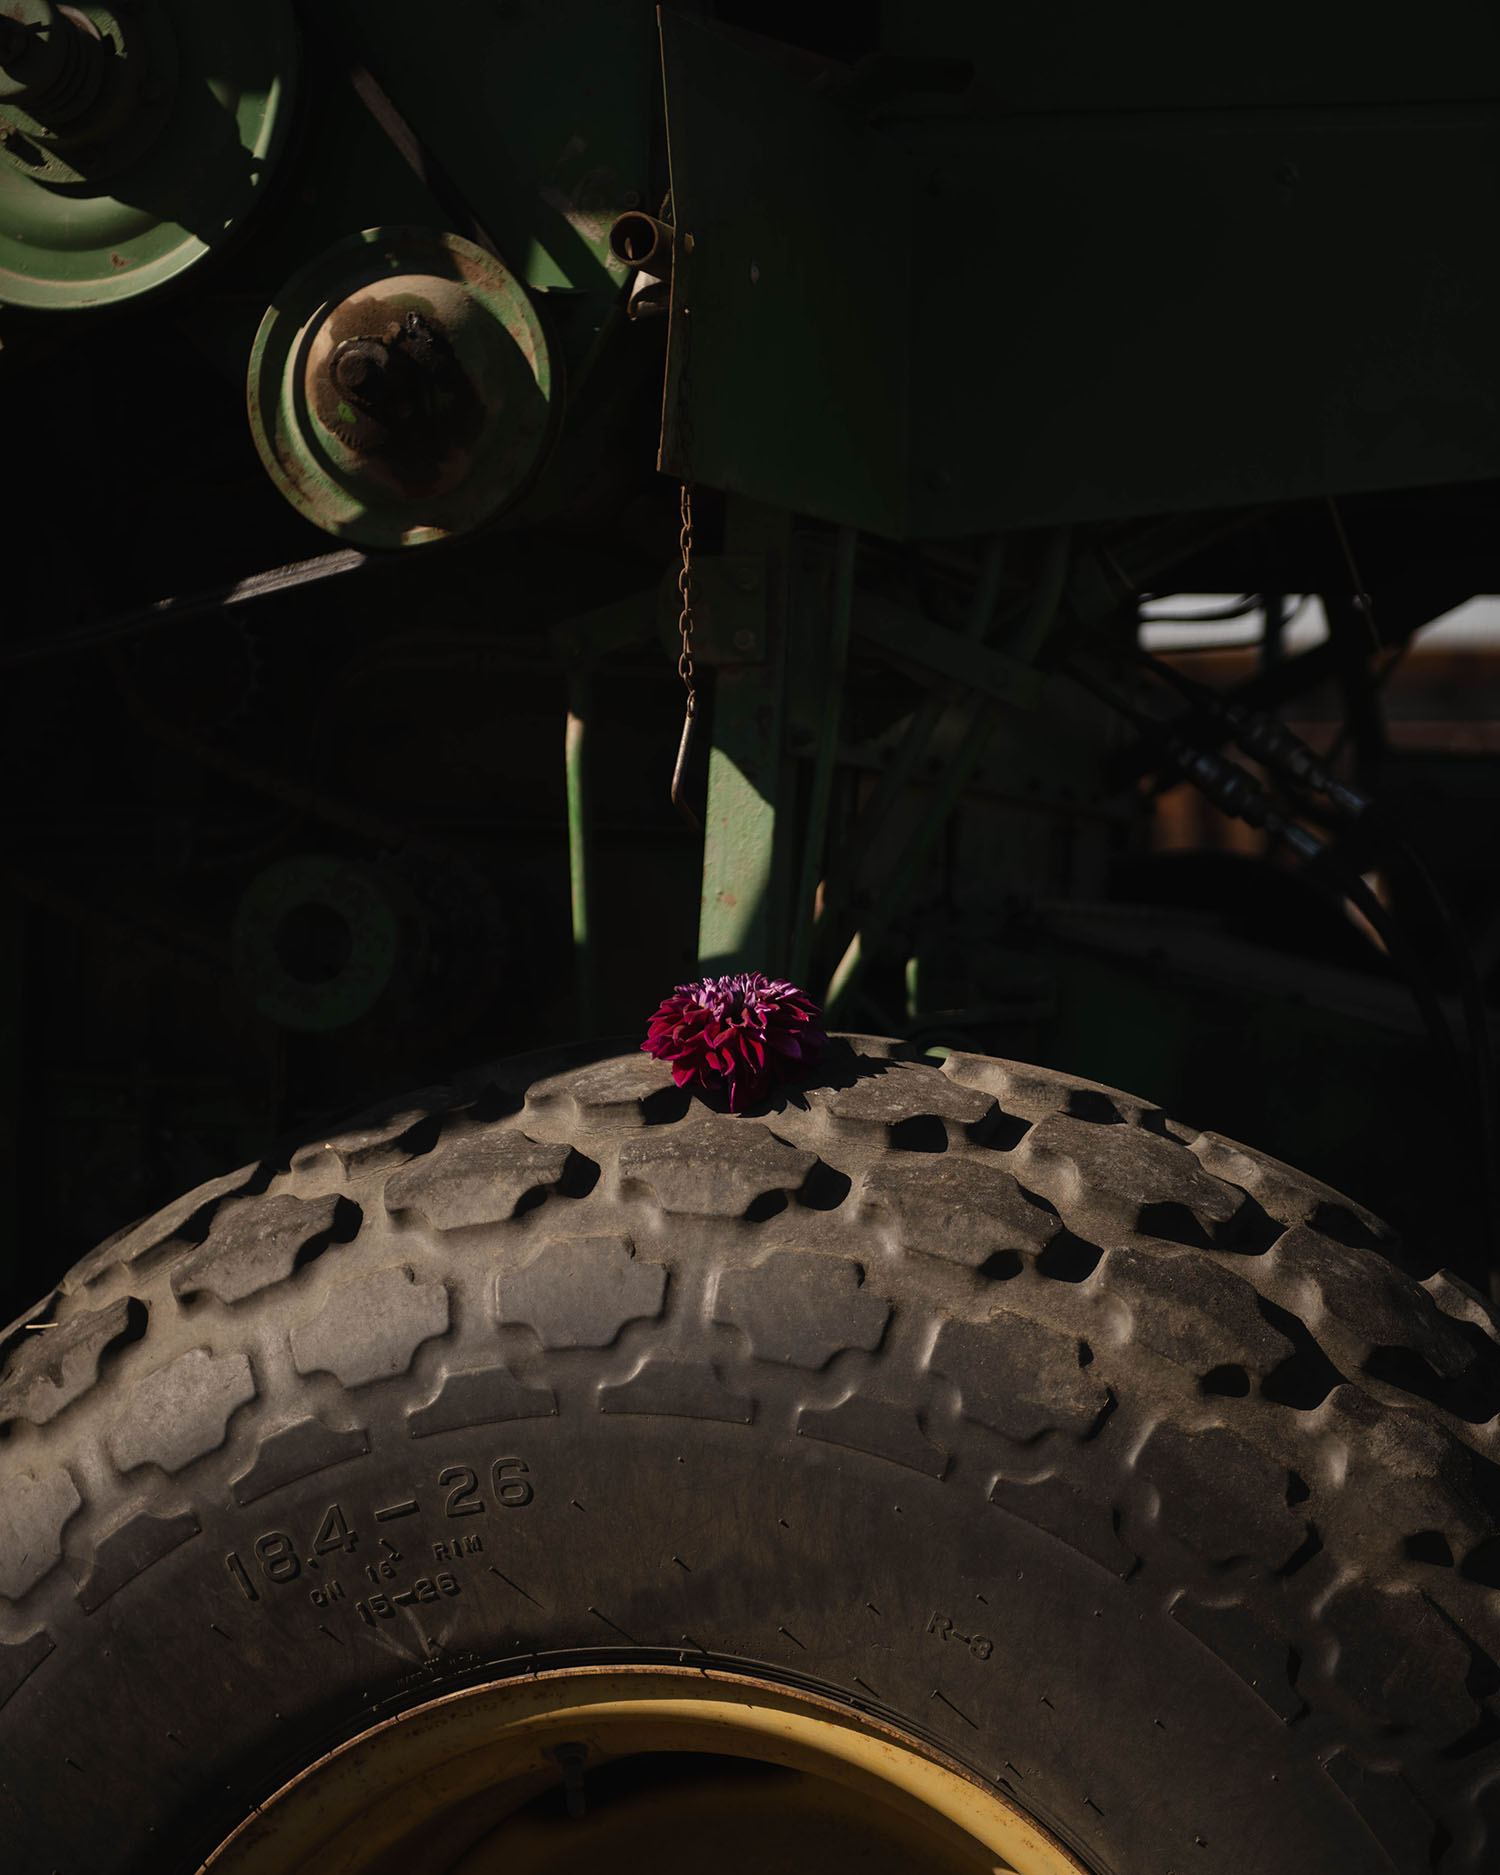 Detail of a flower on the wheel of a tractor.